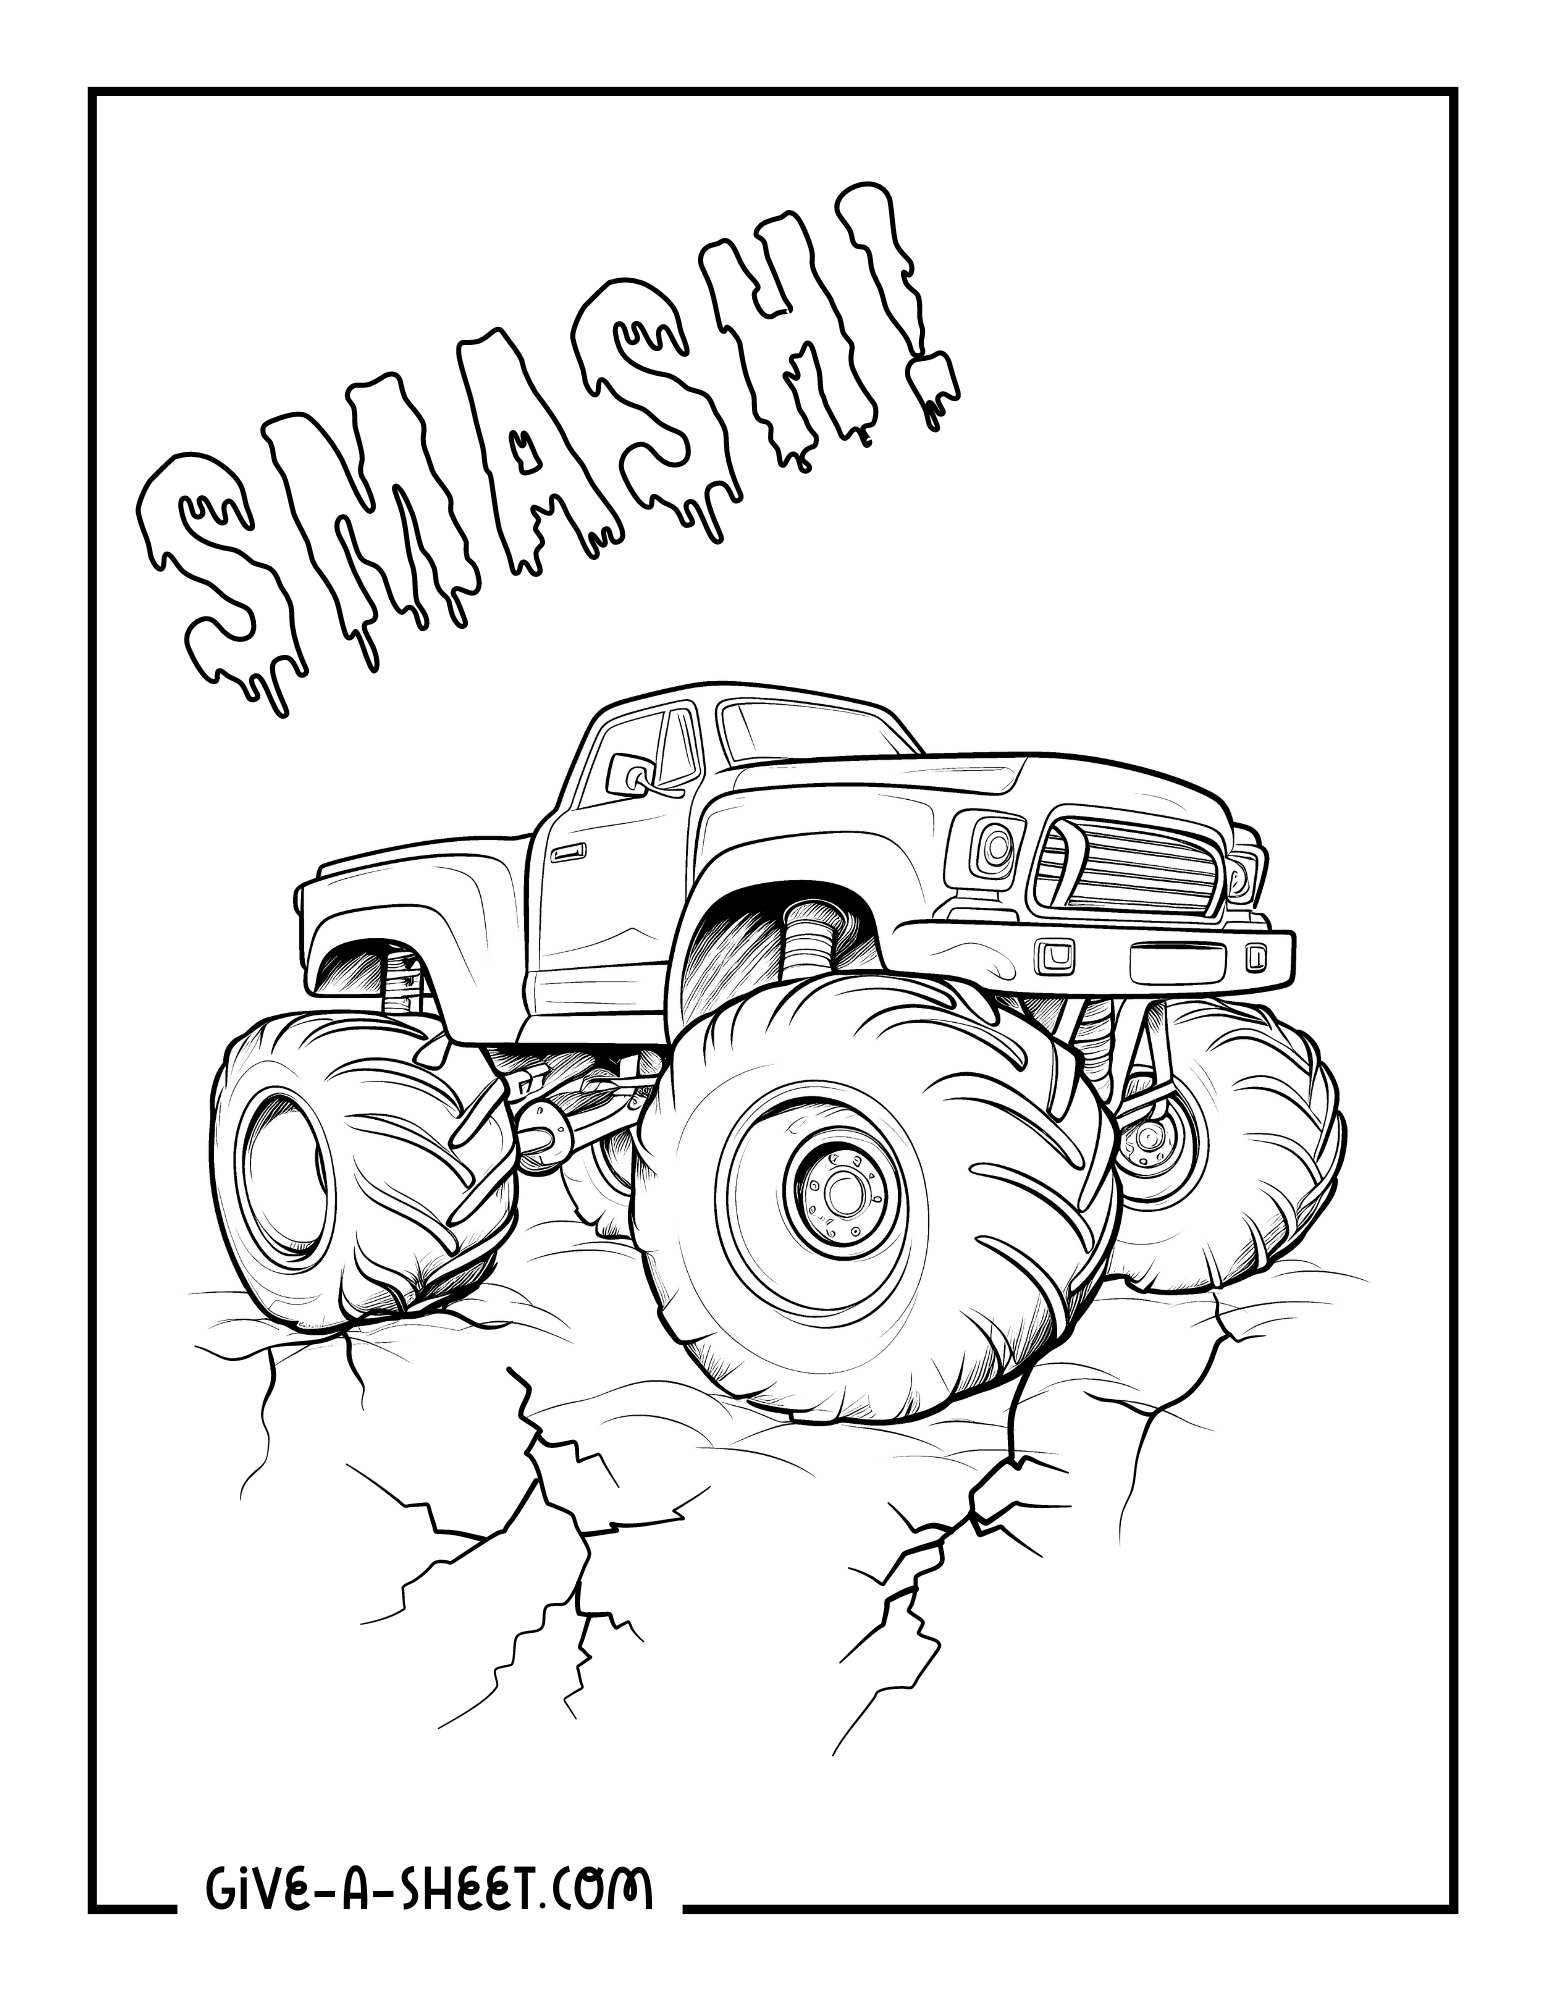 Monster jam circuit competition coloring page for adults.